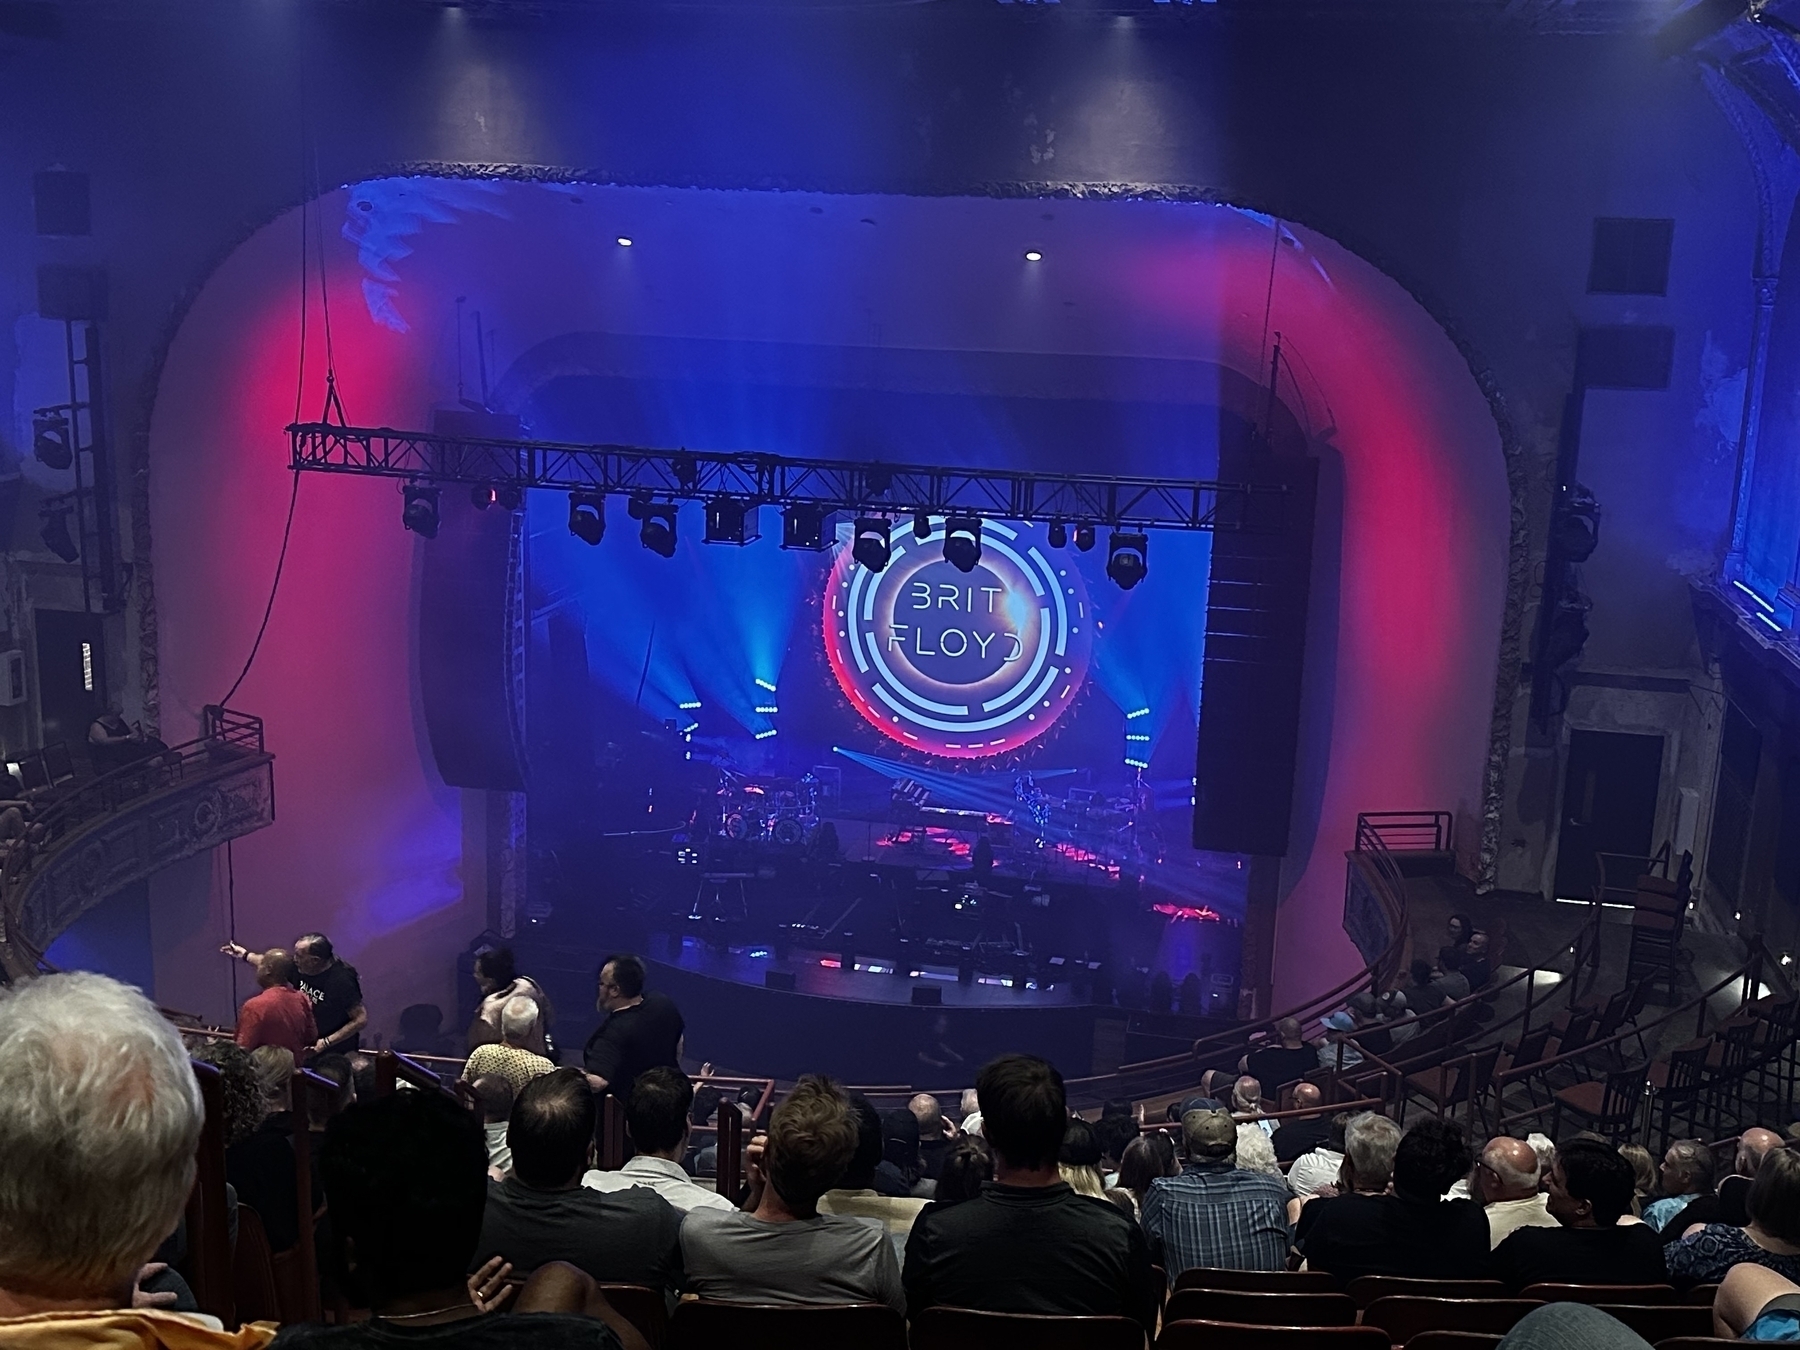 Smokey palace theater for Brit Floyd.